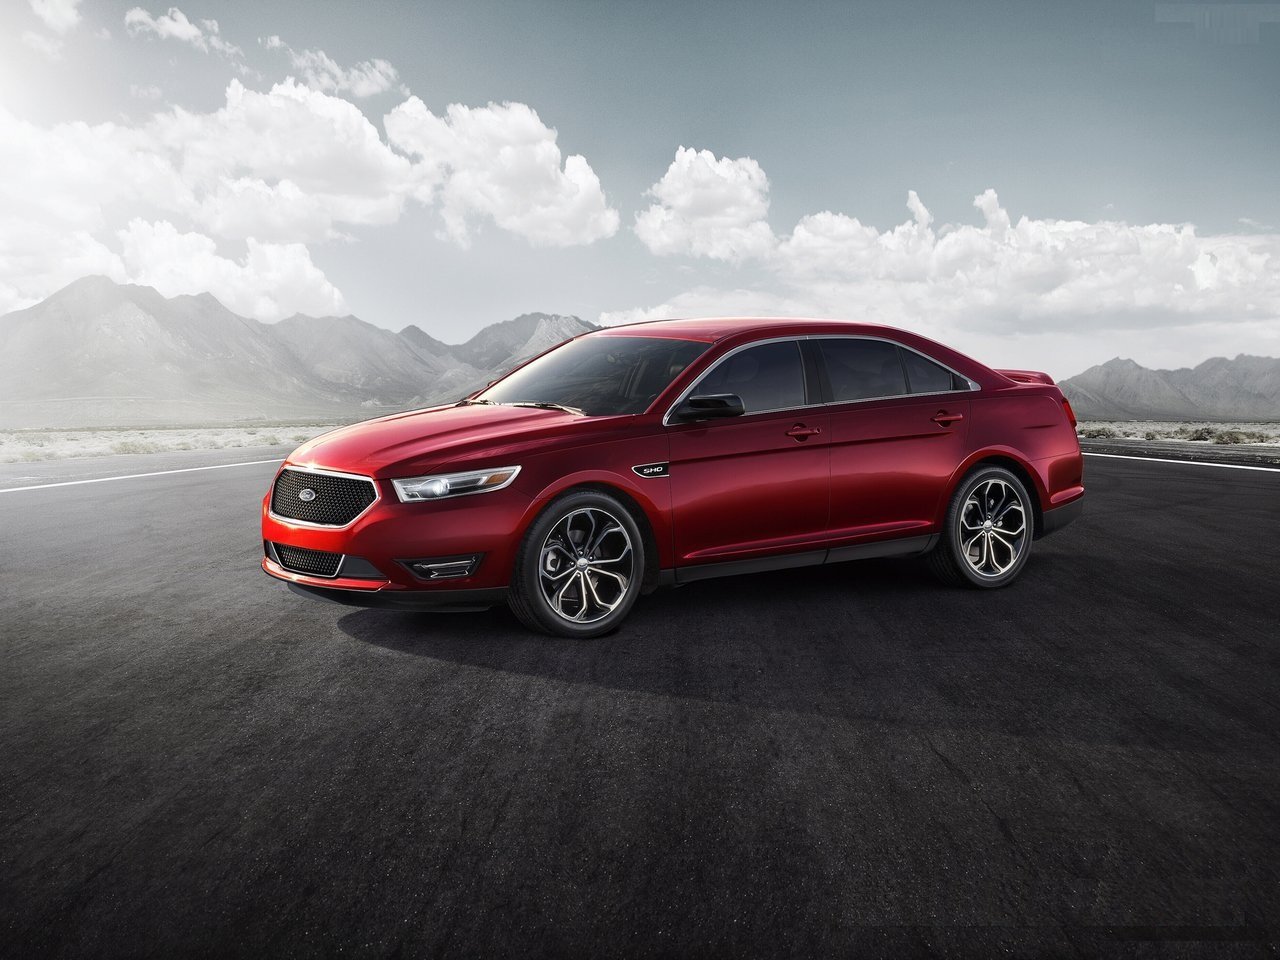 Image of Ford Taurus SHO